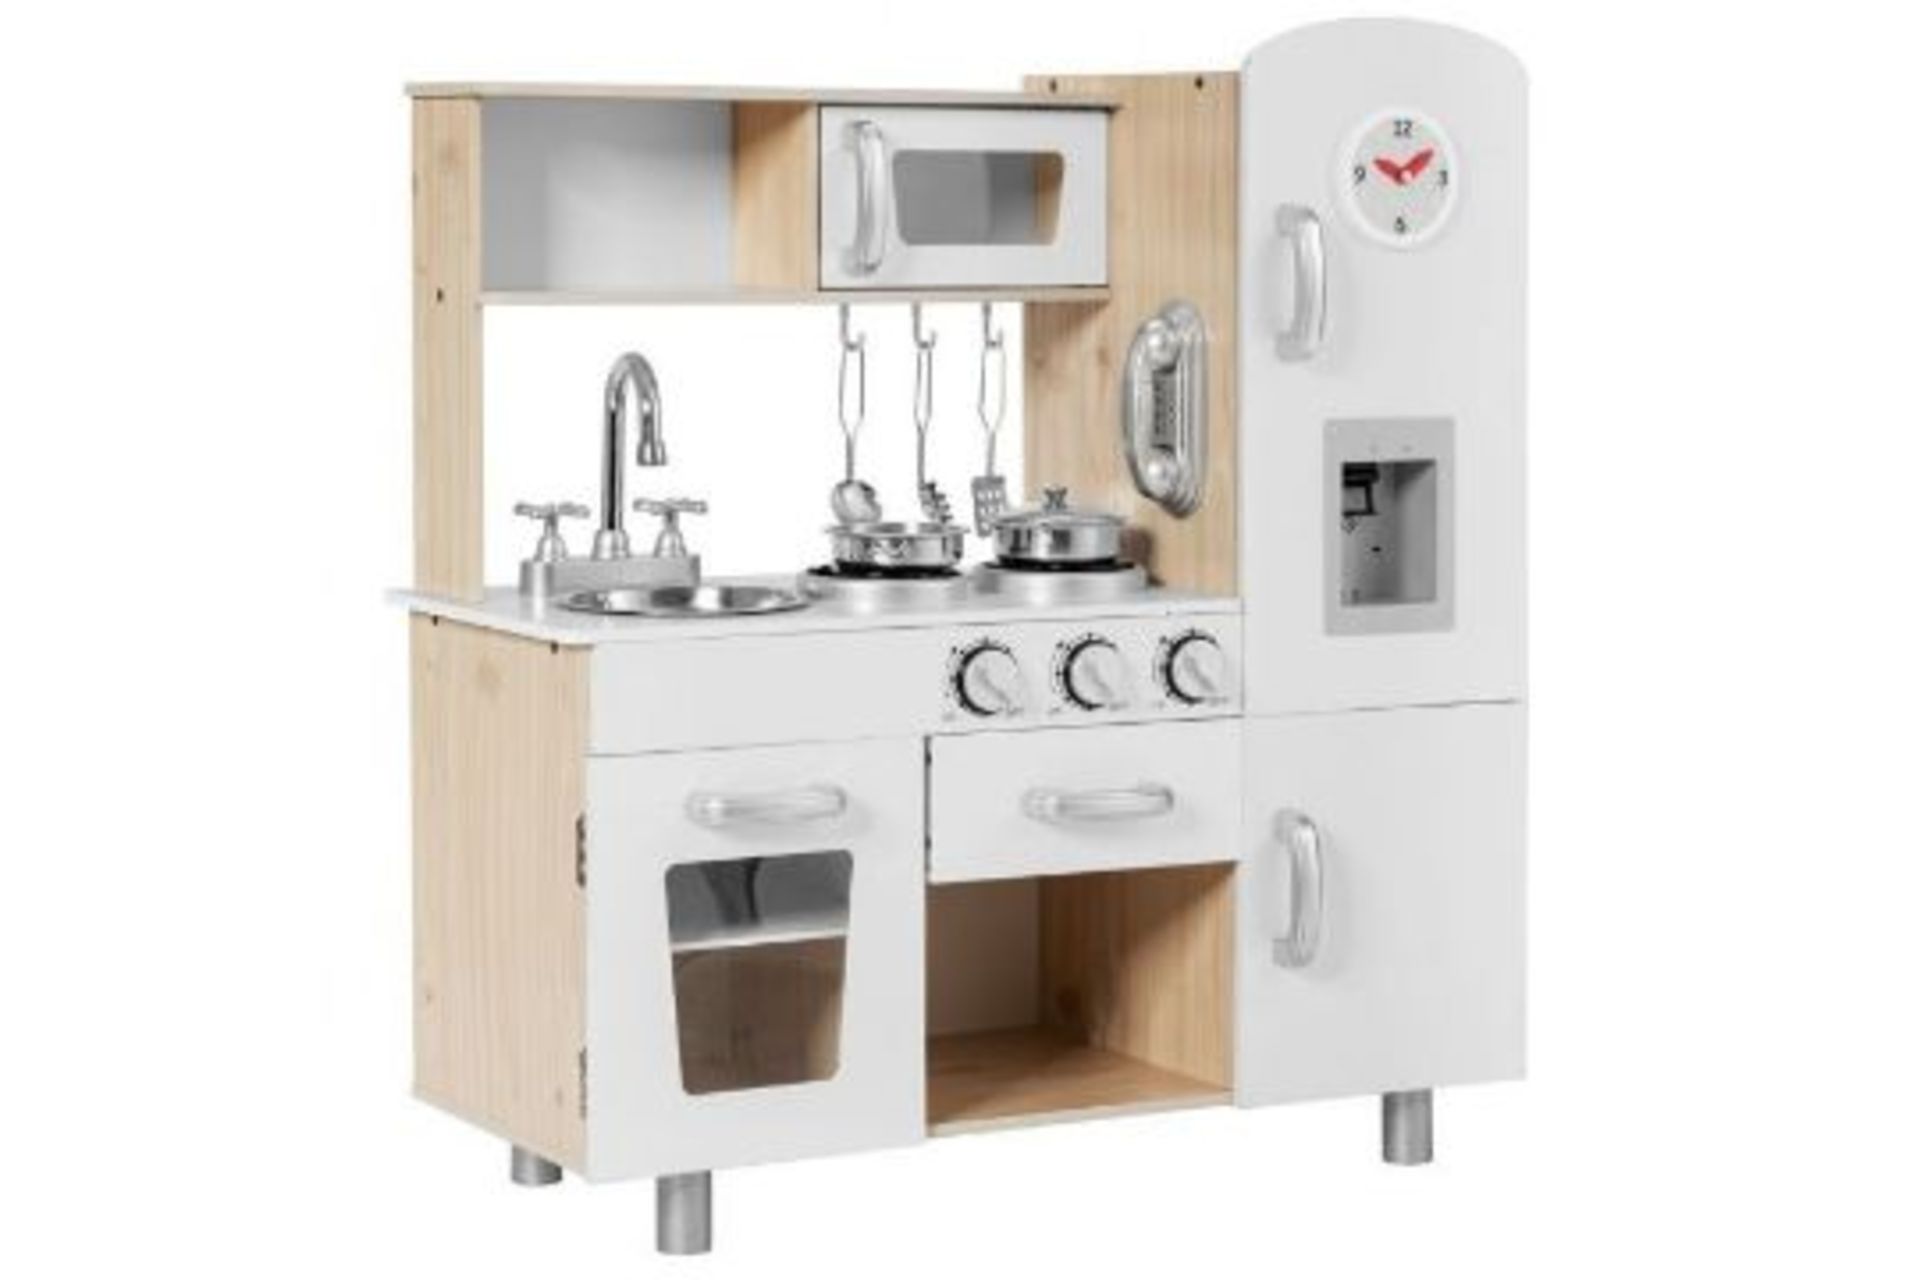 Large Wooden Kids Play Kitchen Pretend Set Toy Cooking Gift. -R14.5. The kids kitchen play set is